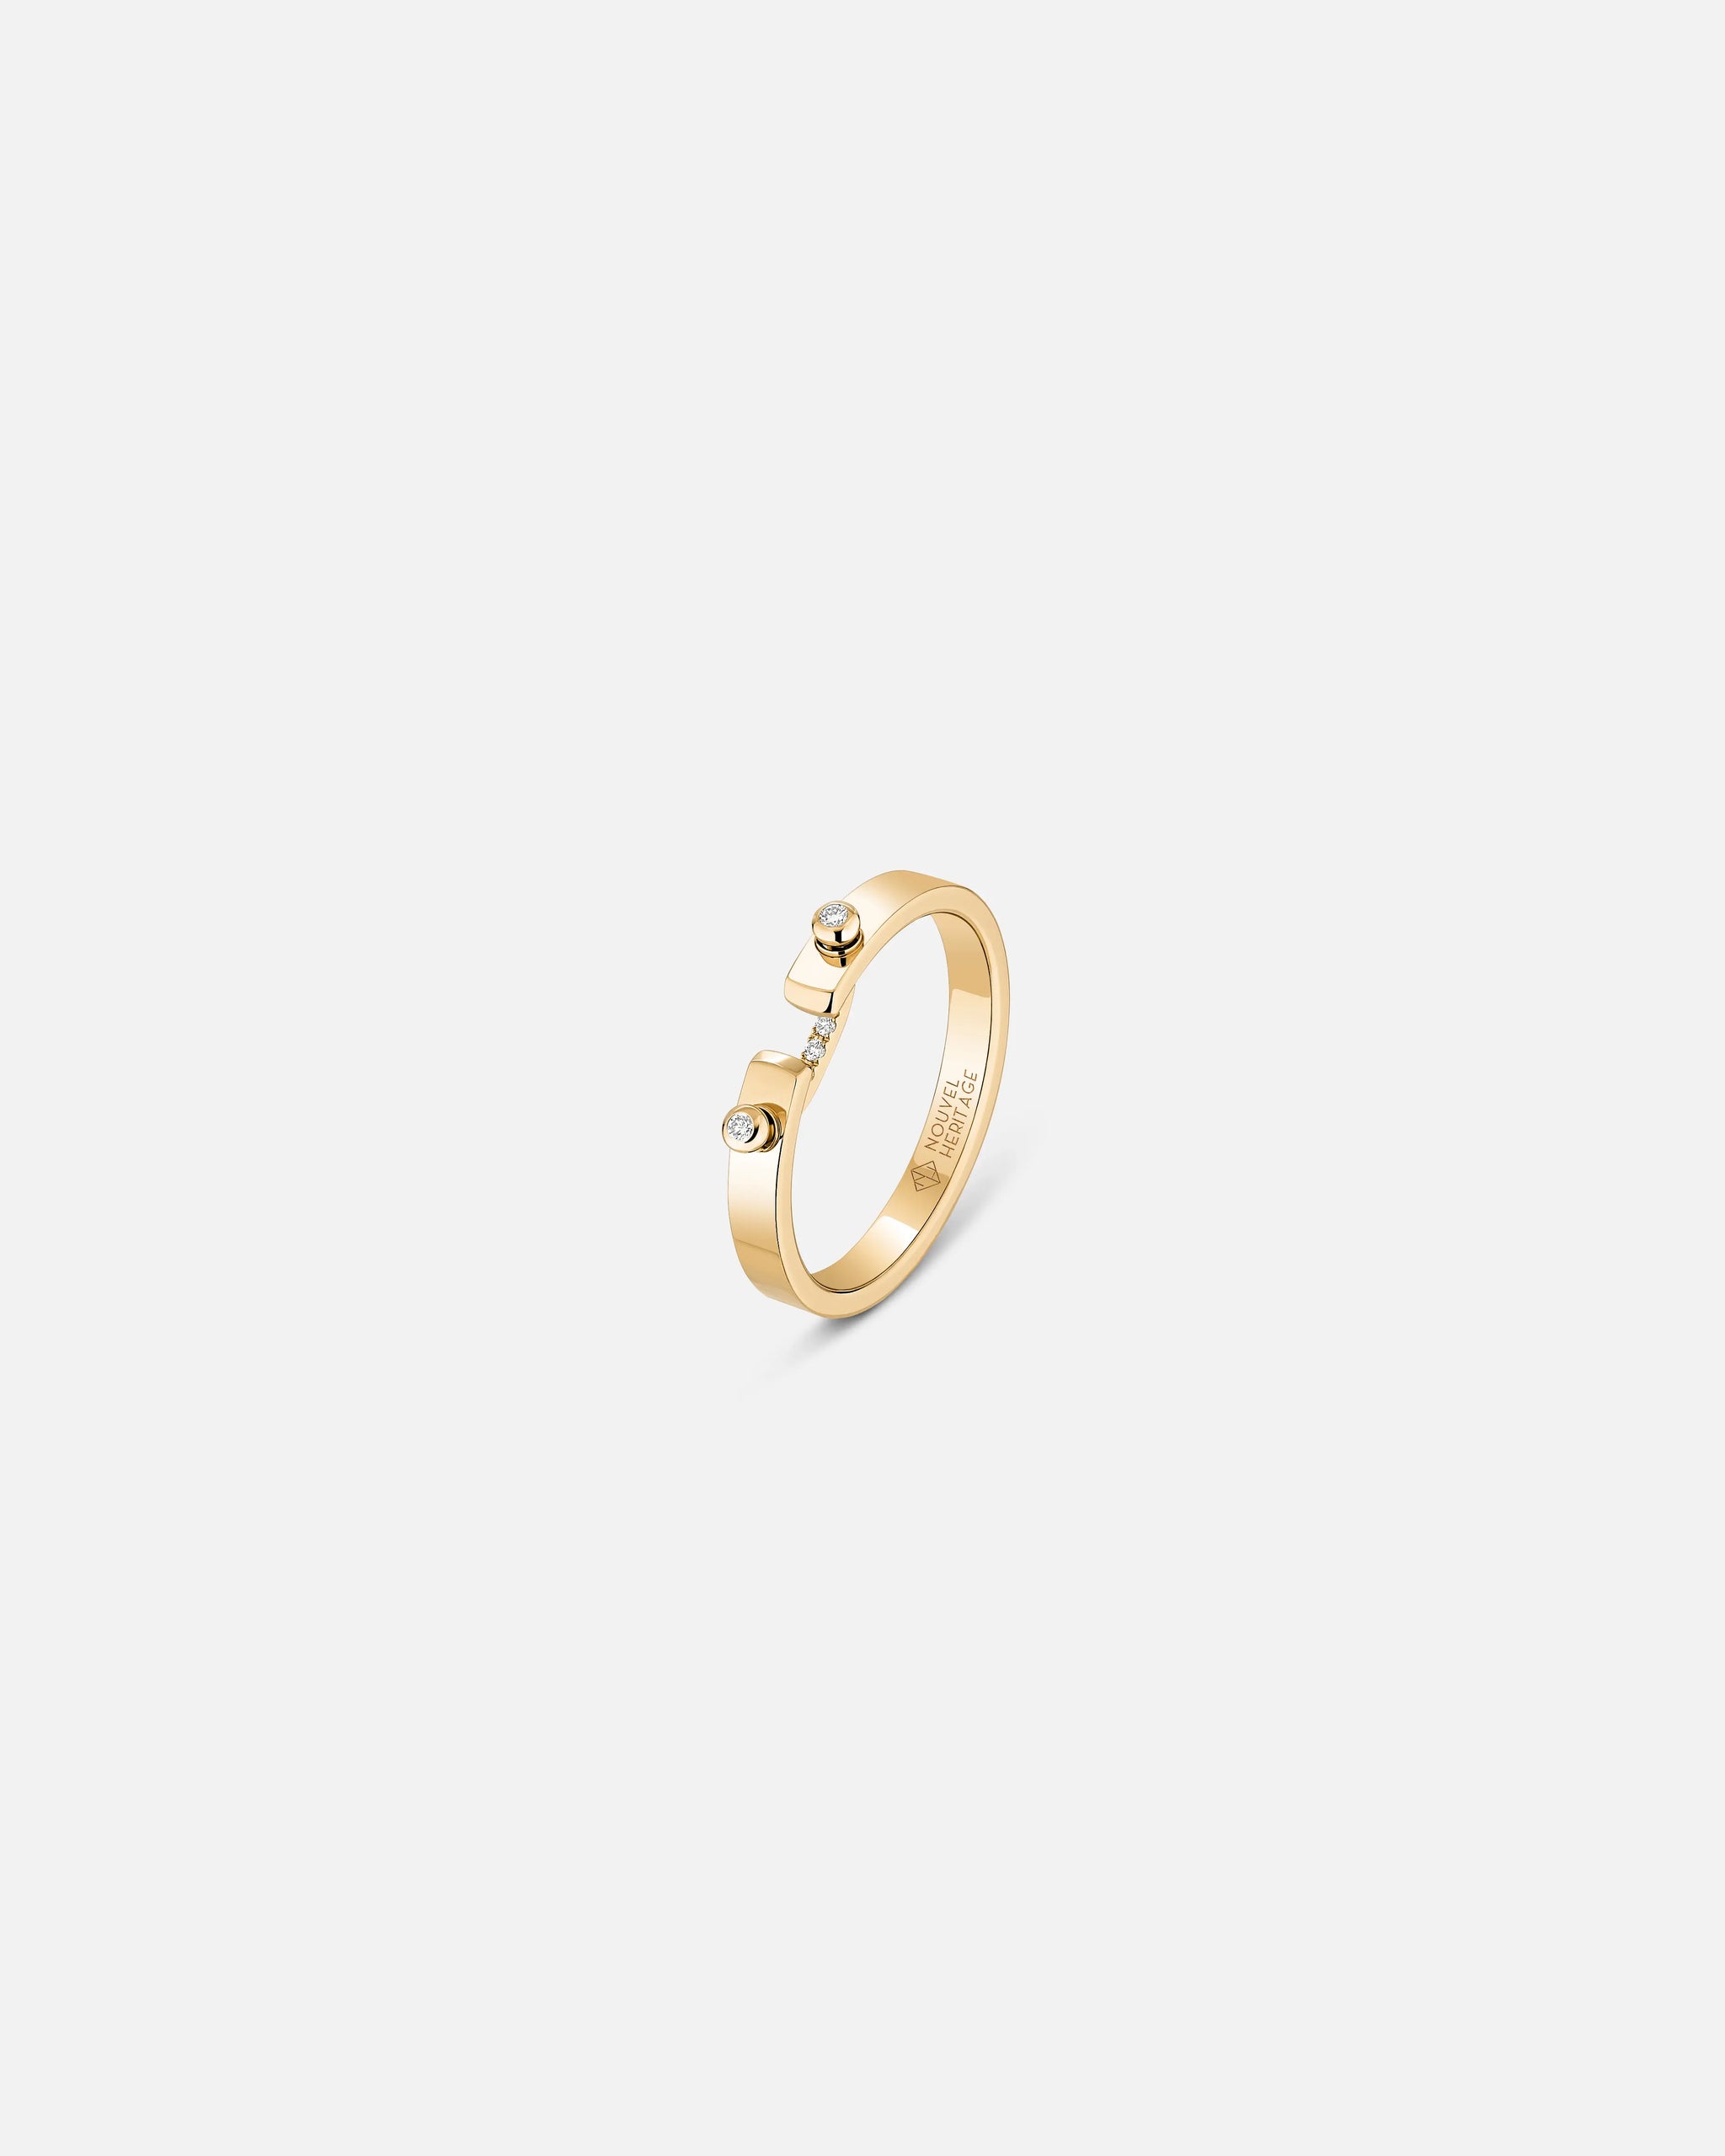 Business Meeting PM Mood Ring in Yellow Gold - 1 - Nouvel Heritage